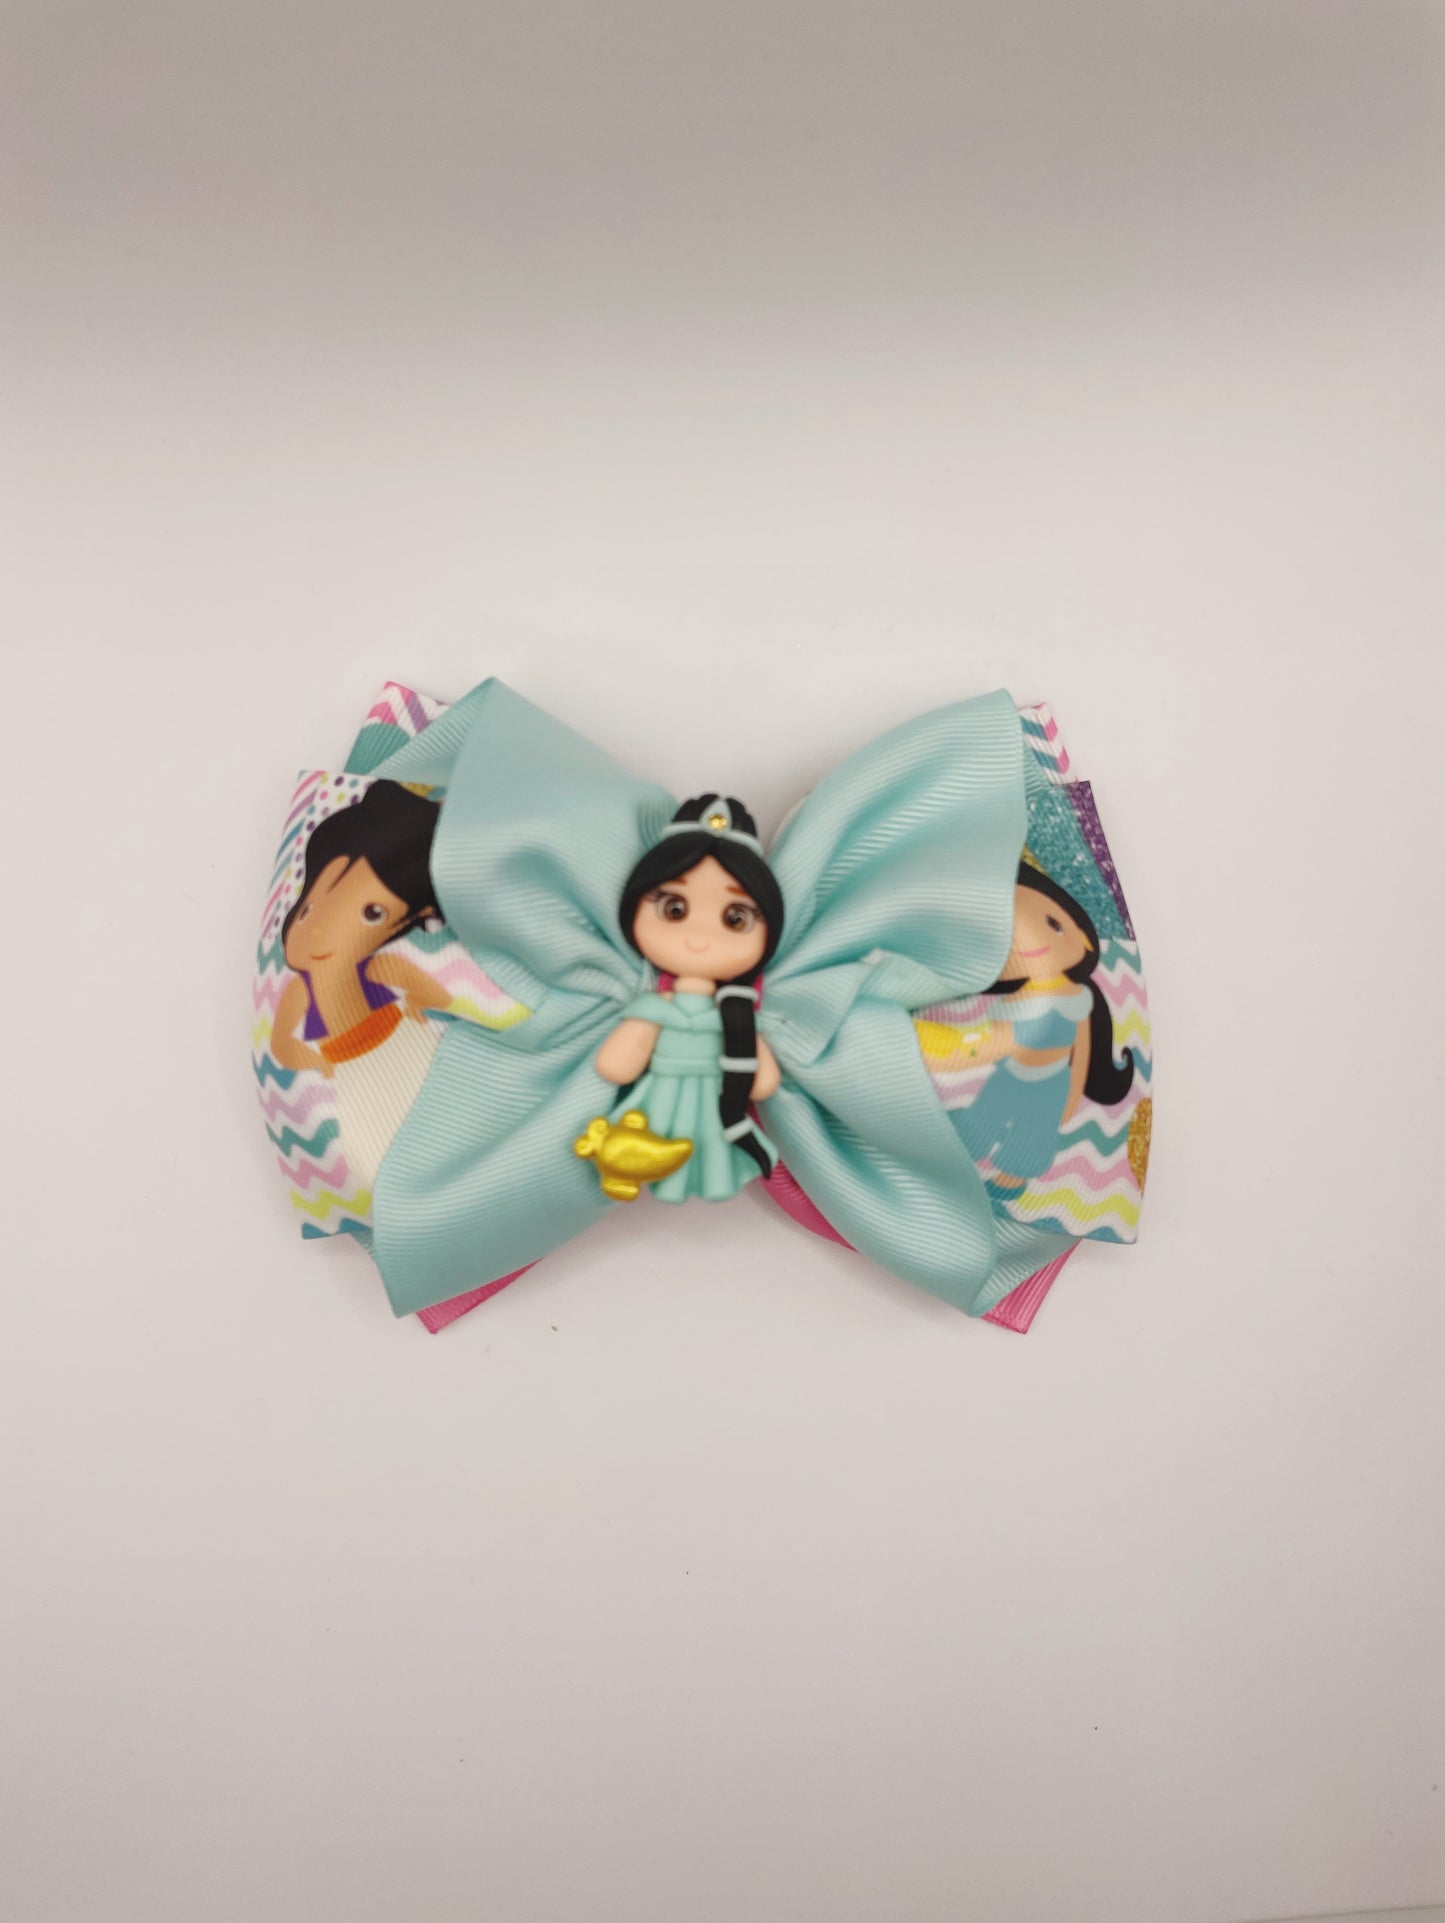 Princess Girl Hair Bow 5” Hair Bows for Girls Alligator Clips Grossgrain Ribbons Bows Jazmine Girl Hair Bow Bows Clips for Infants Toddlers Kids Teens